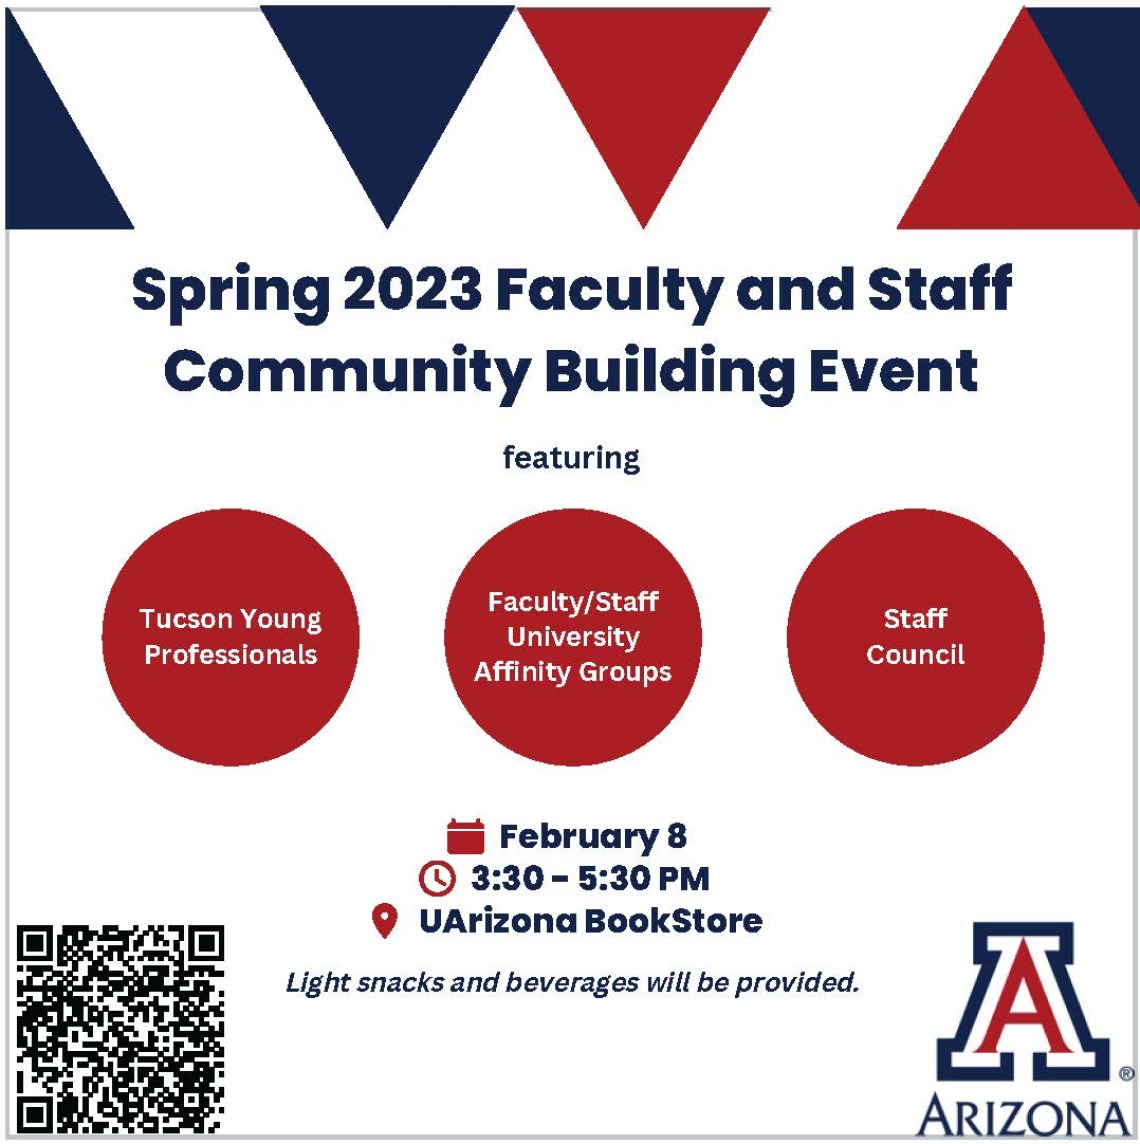 Event Flyer for Spring 2023 Faculty & Staff Community Building Event